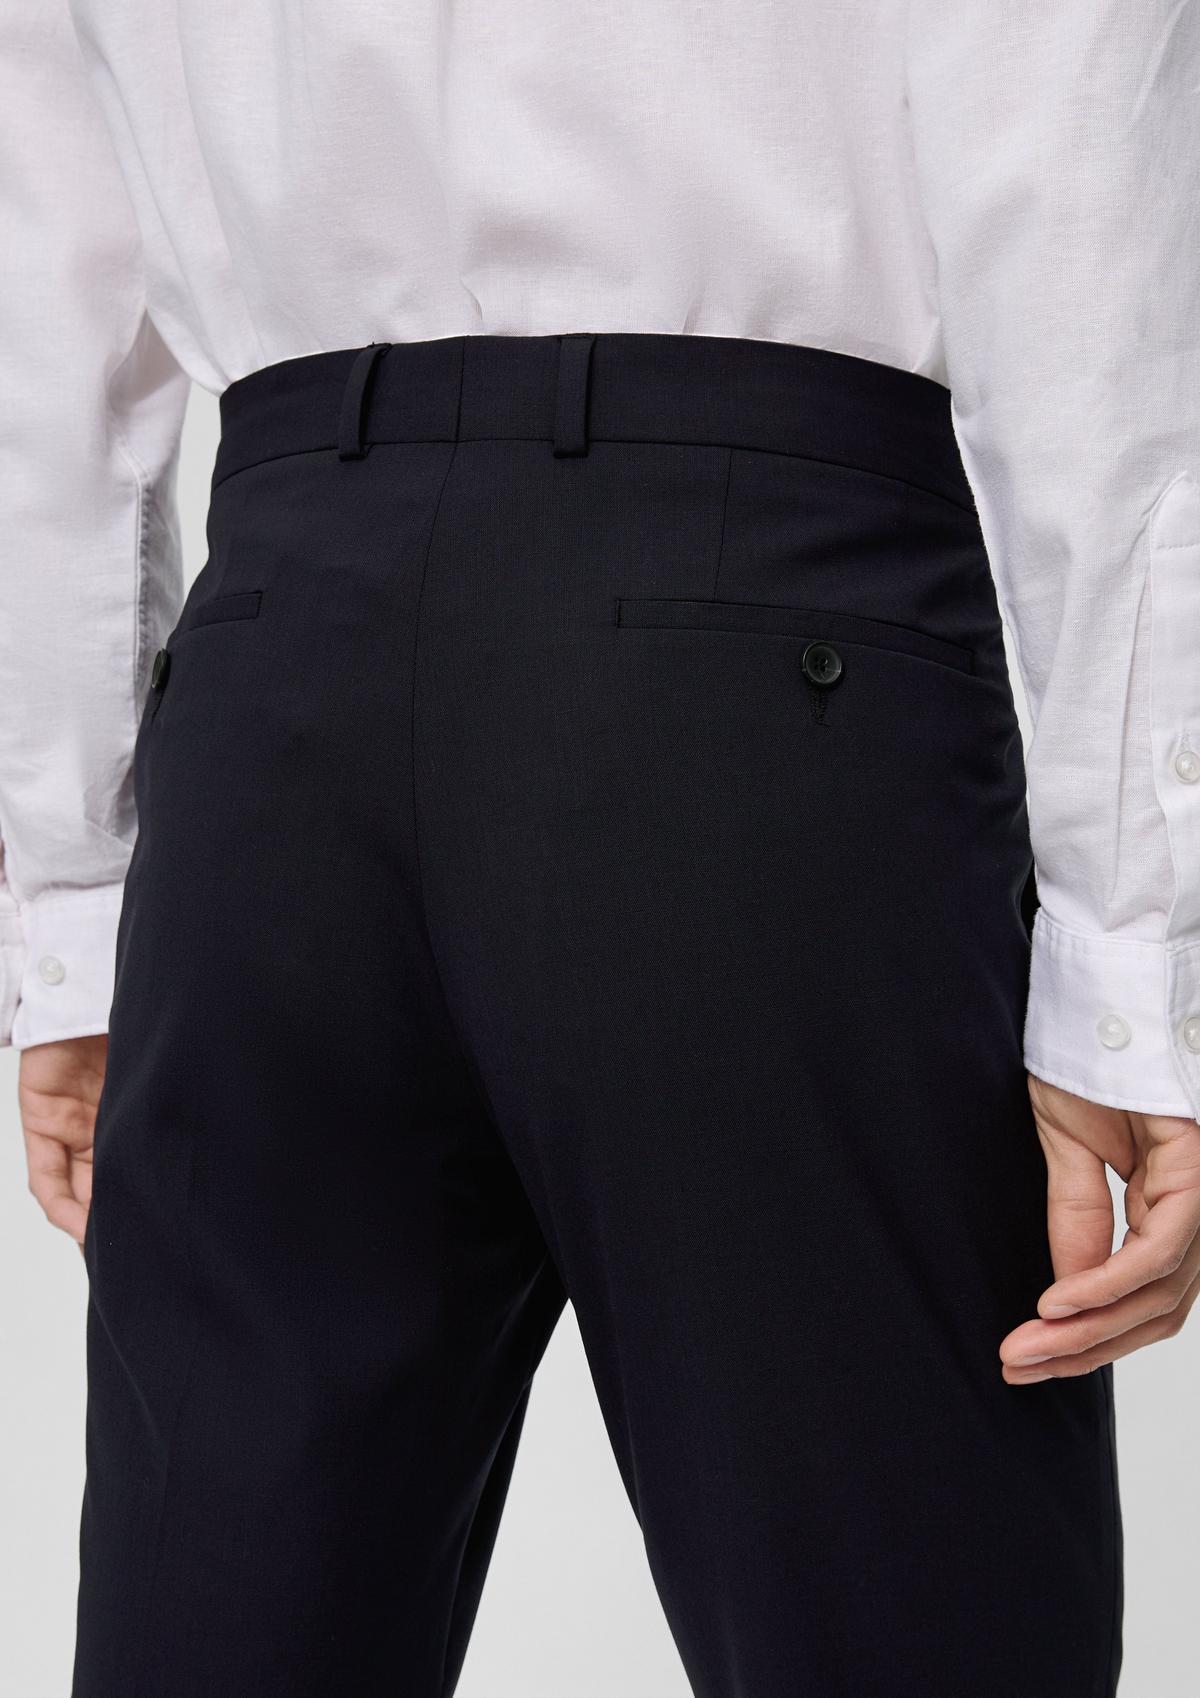 s.Oliver Slim fit: trousers with pressed pleats